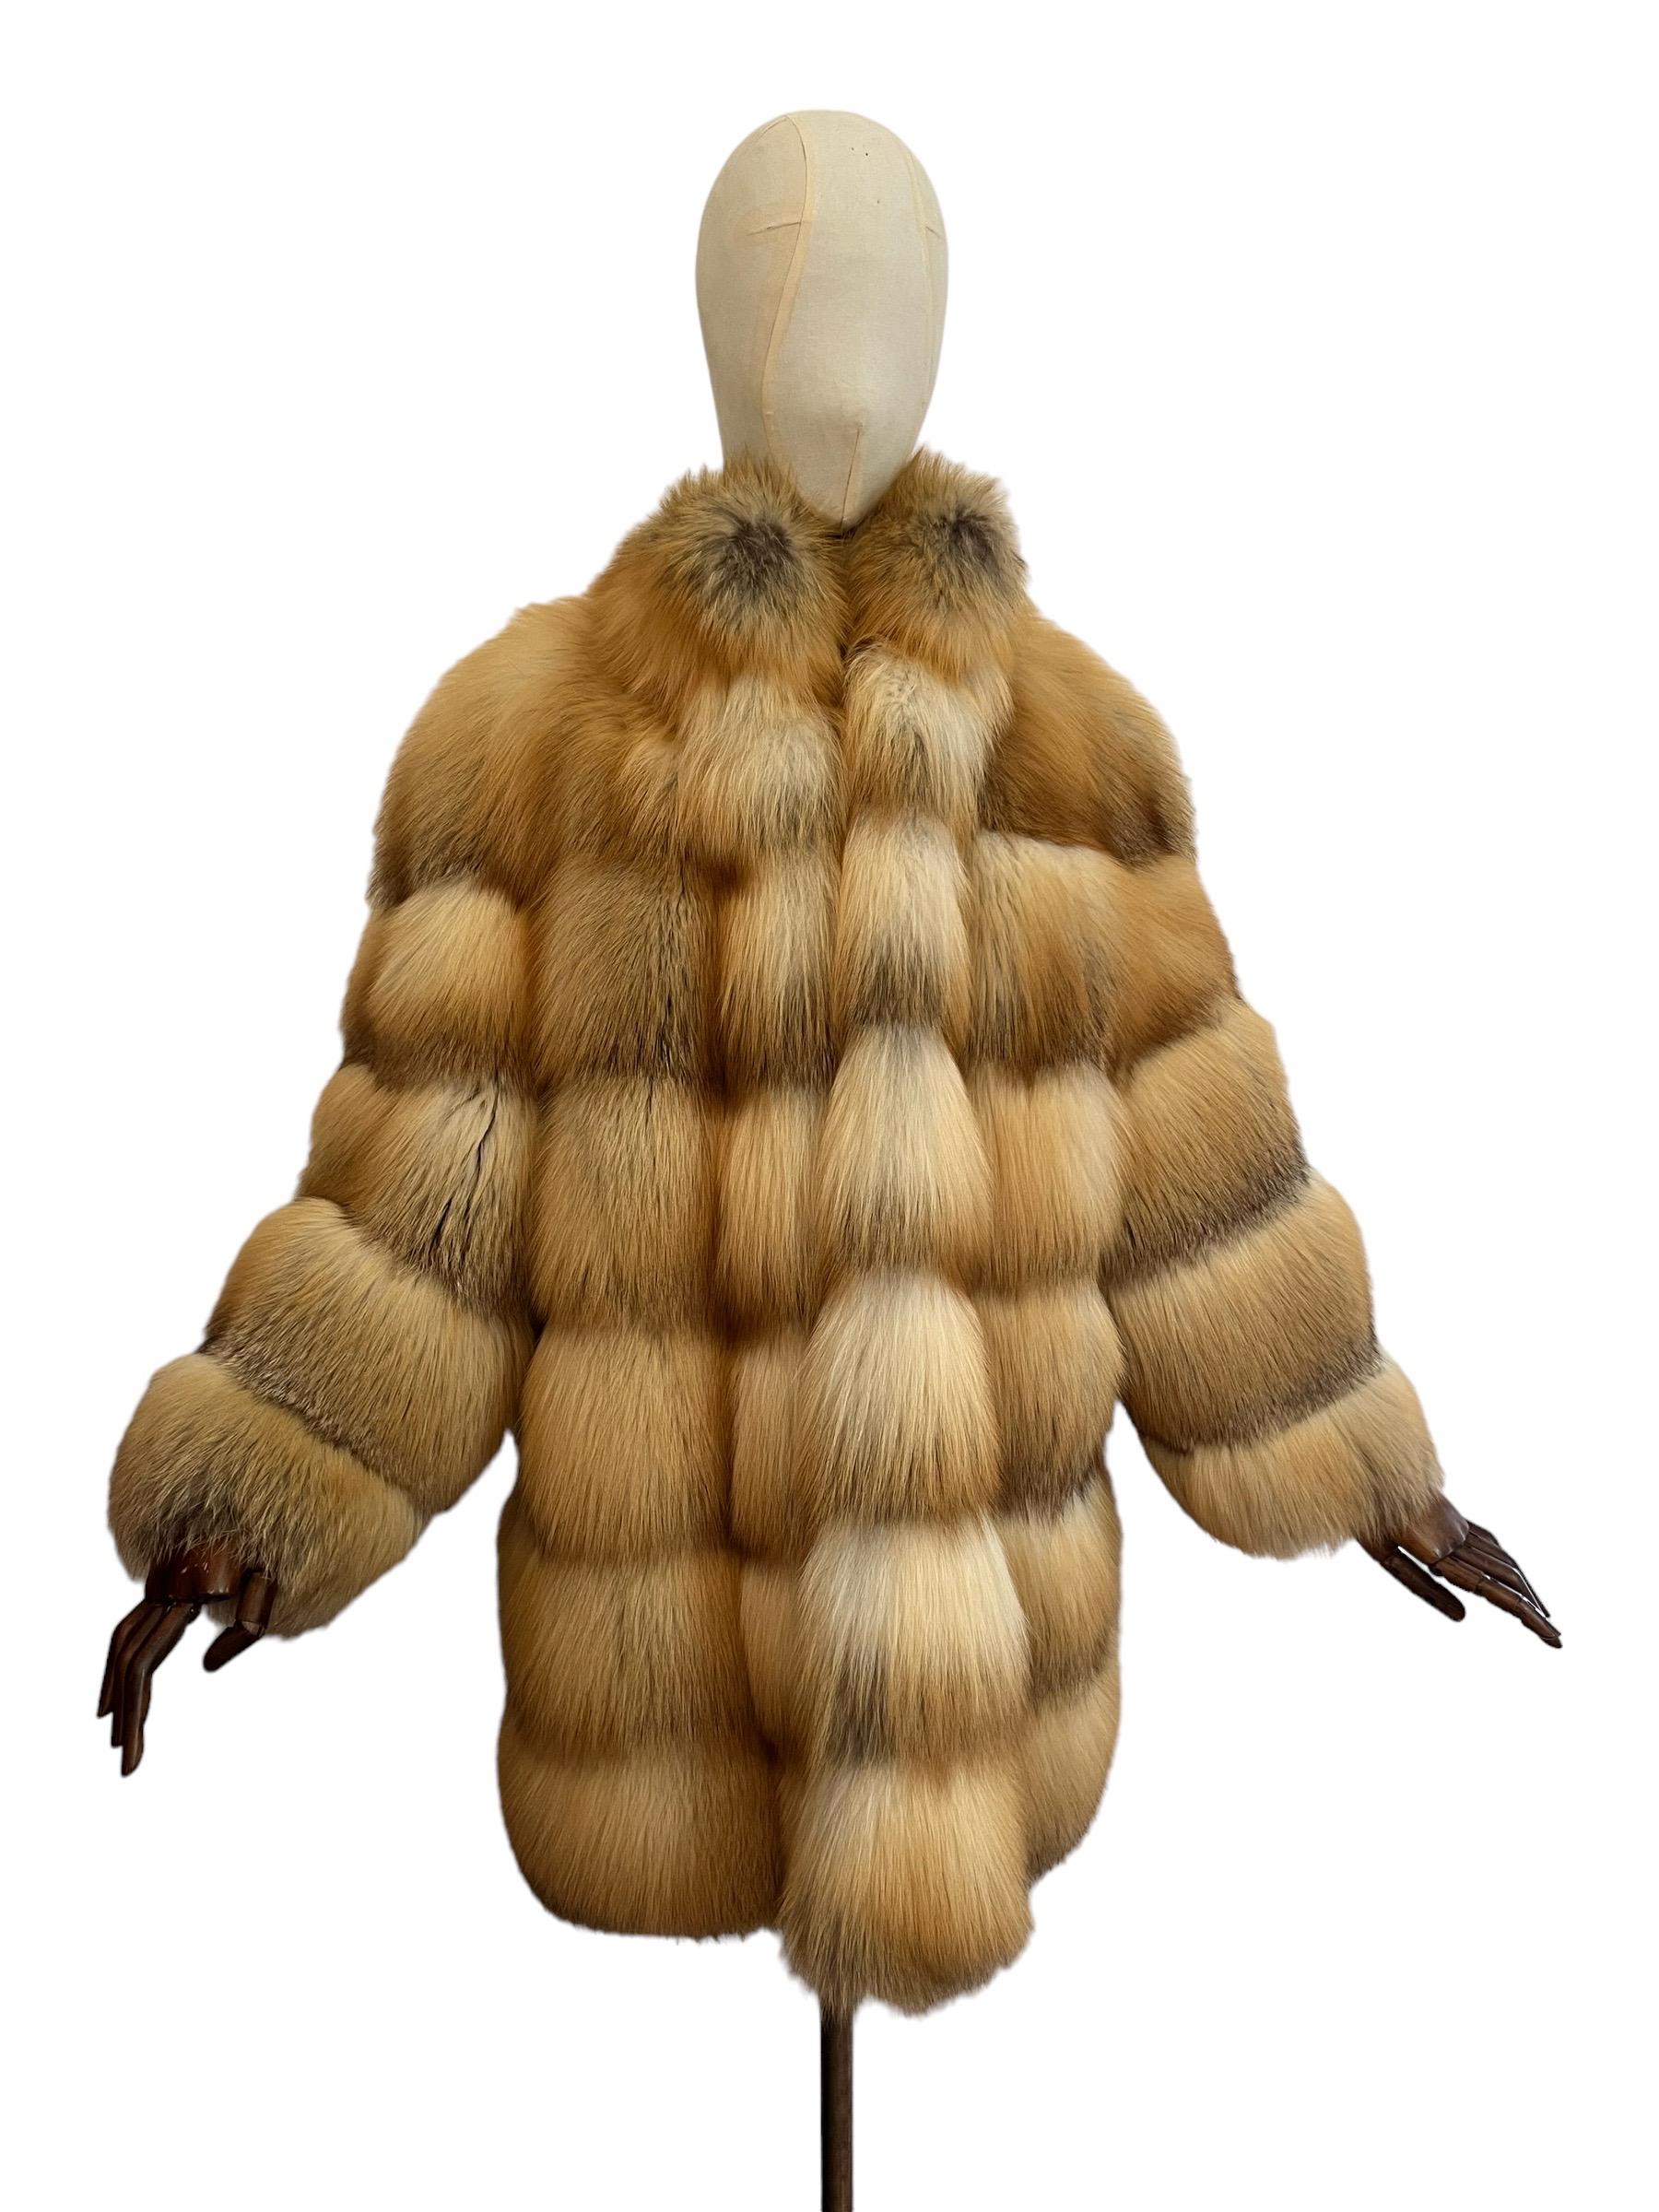 Incredible, Opulent Vintage ESCADA by Margaretha Ley Fur Coat circa 2000.

This exceptional Vintage Fur Jacket features extremely Plush, thick Pelts of soft Natural Golden island Fox (Vulpes Domestica), Velvet lined pockets, central farrier hook